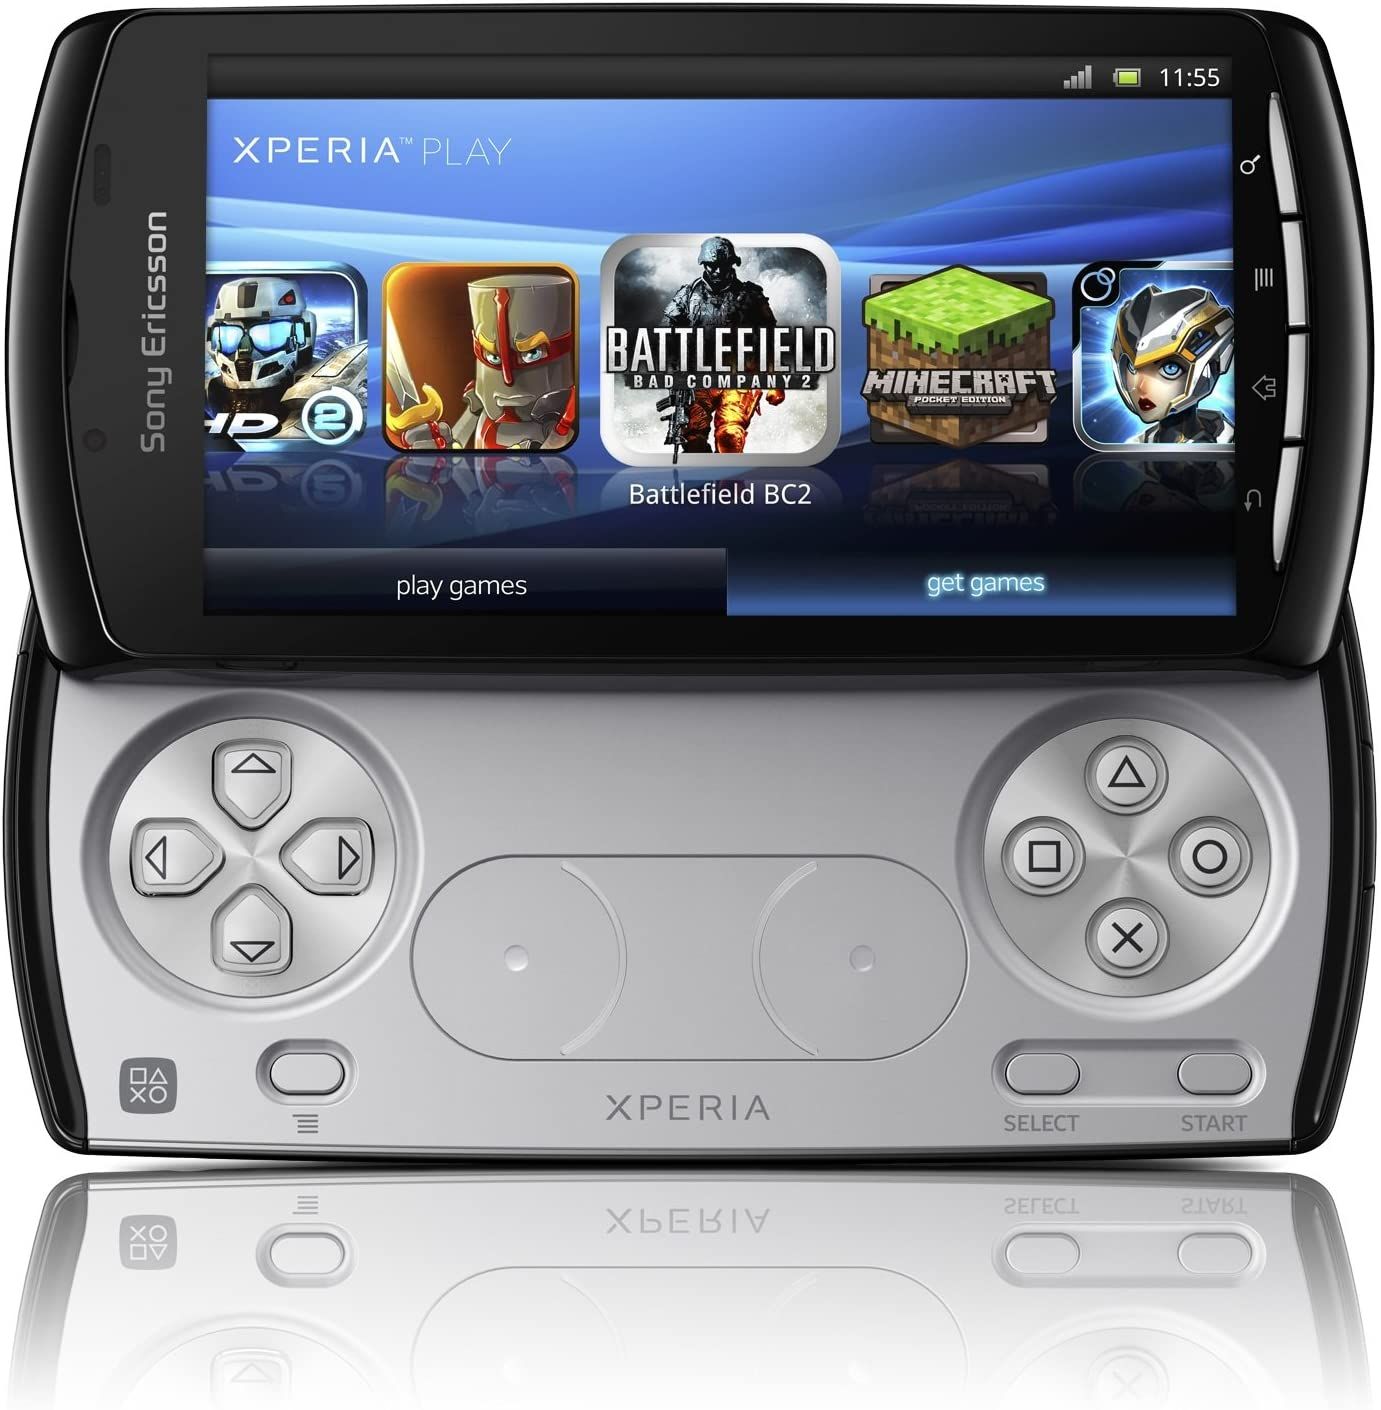 playstation mobile on xperia play